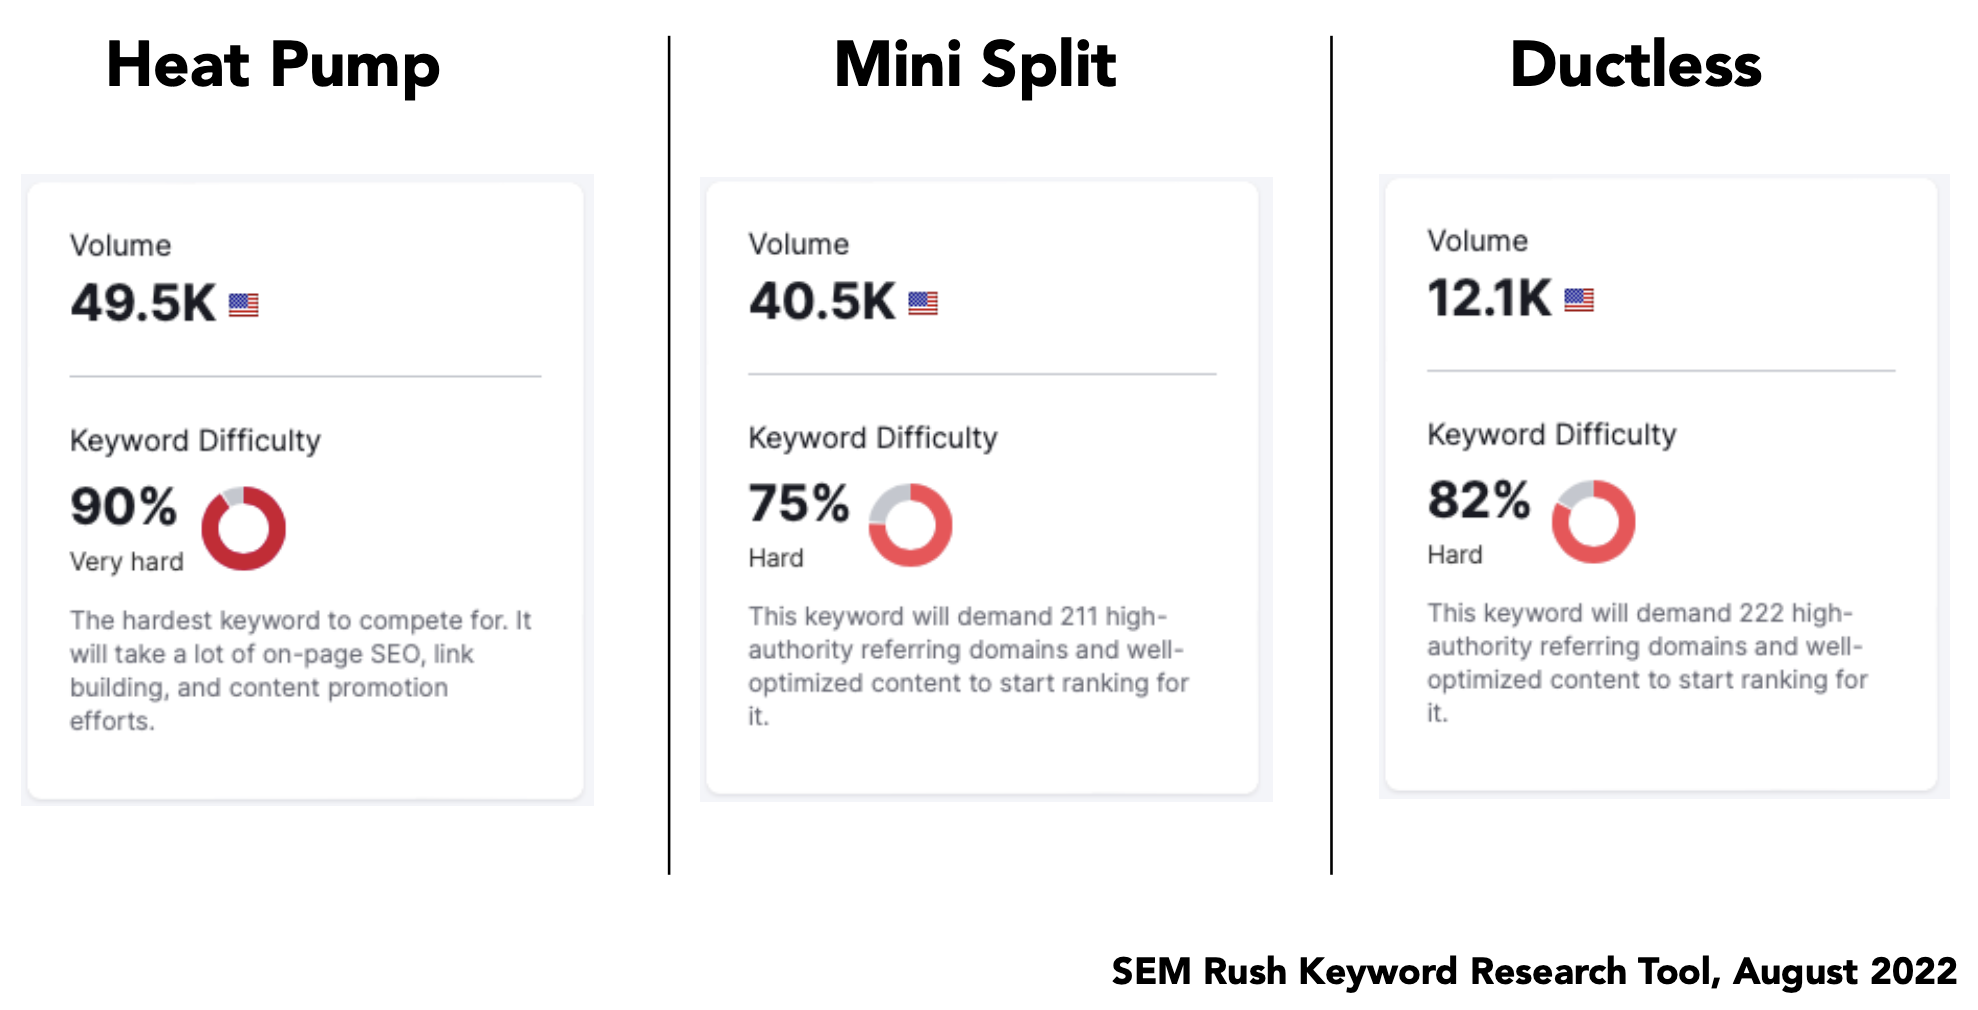 Results on heat pump search terms from SEMRush August 2022